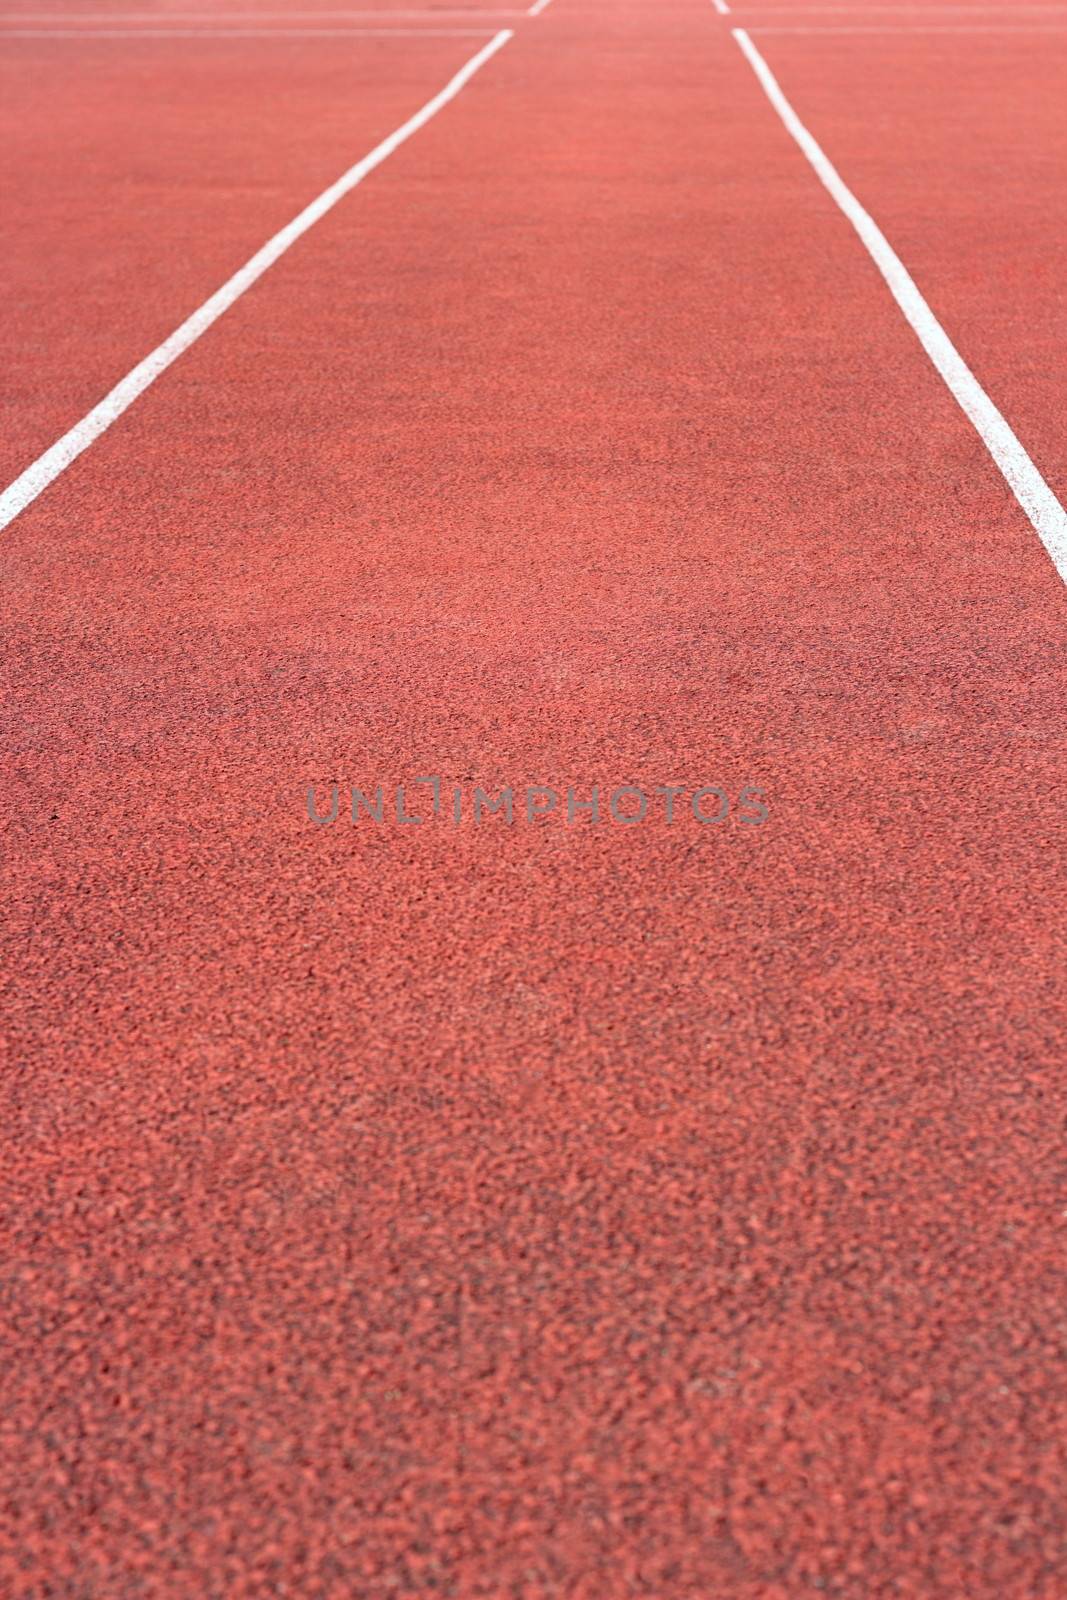 perspective of cinder running track at the sport stadium by taviphoto